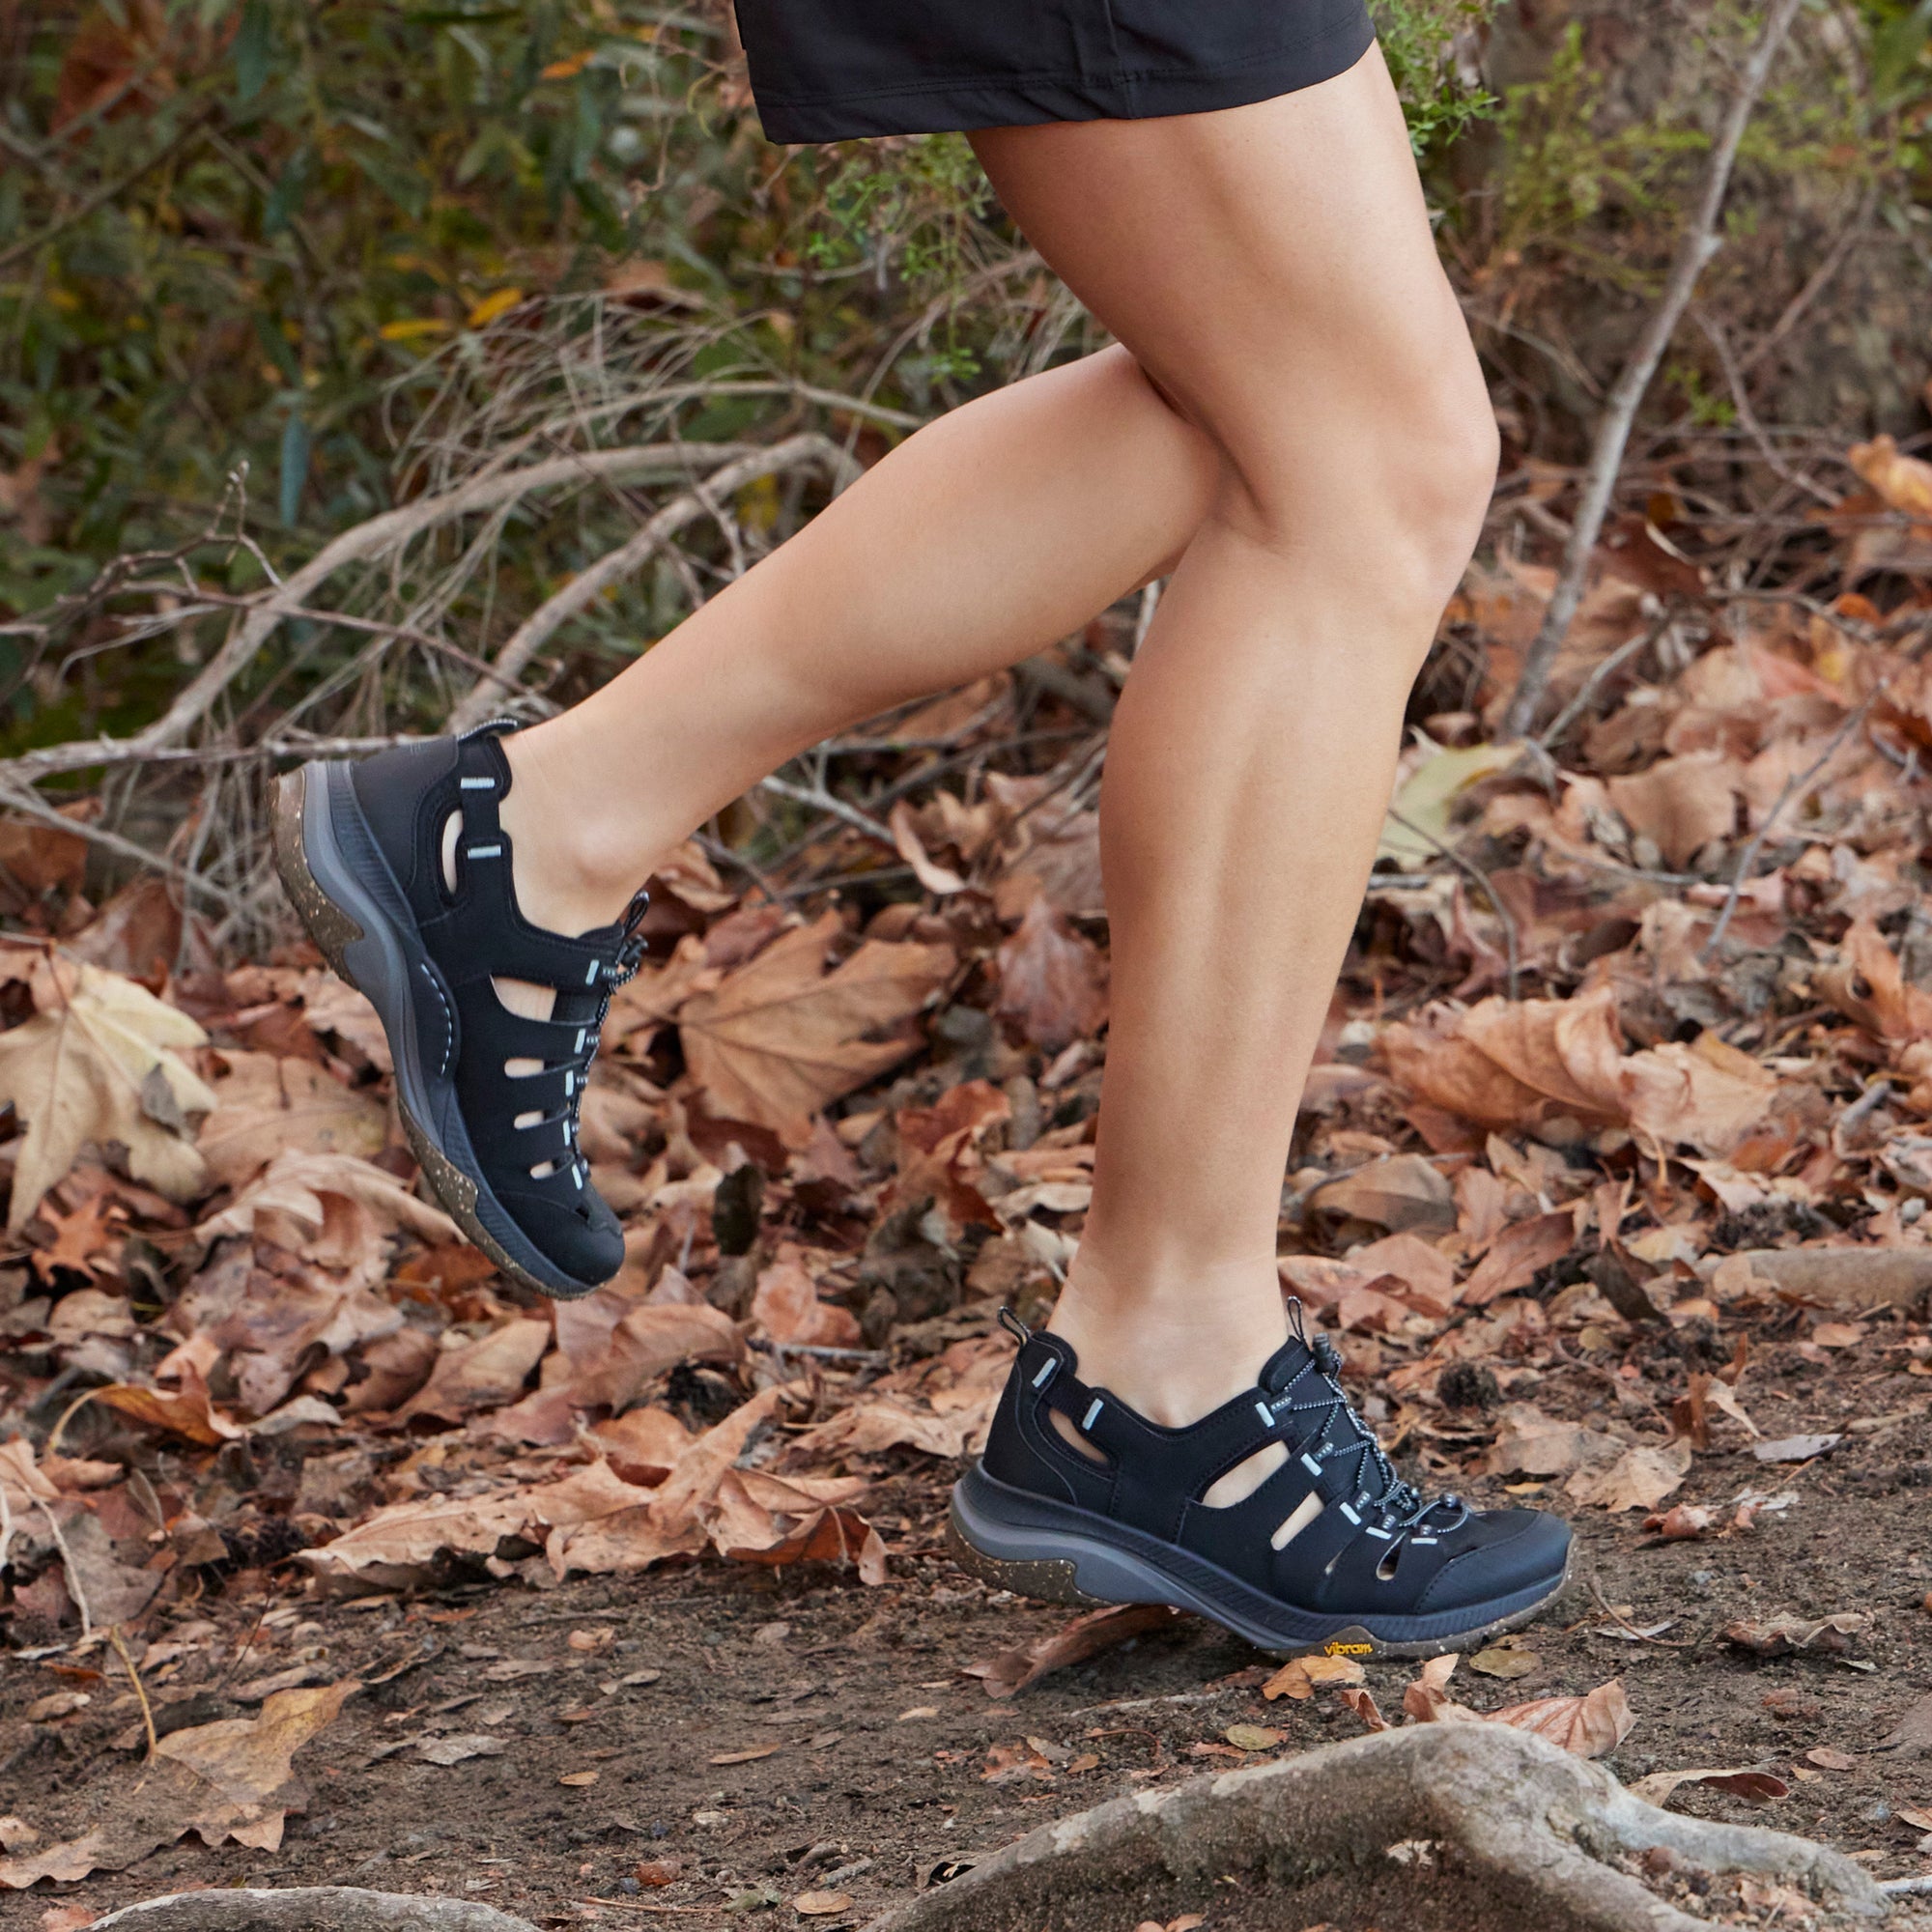 A look at the lightweight and durable black sneaker walking on a path.